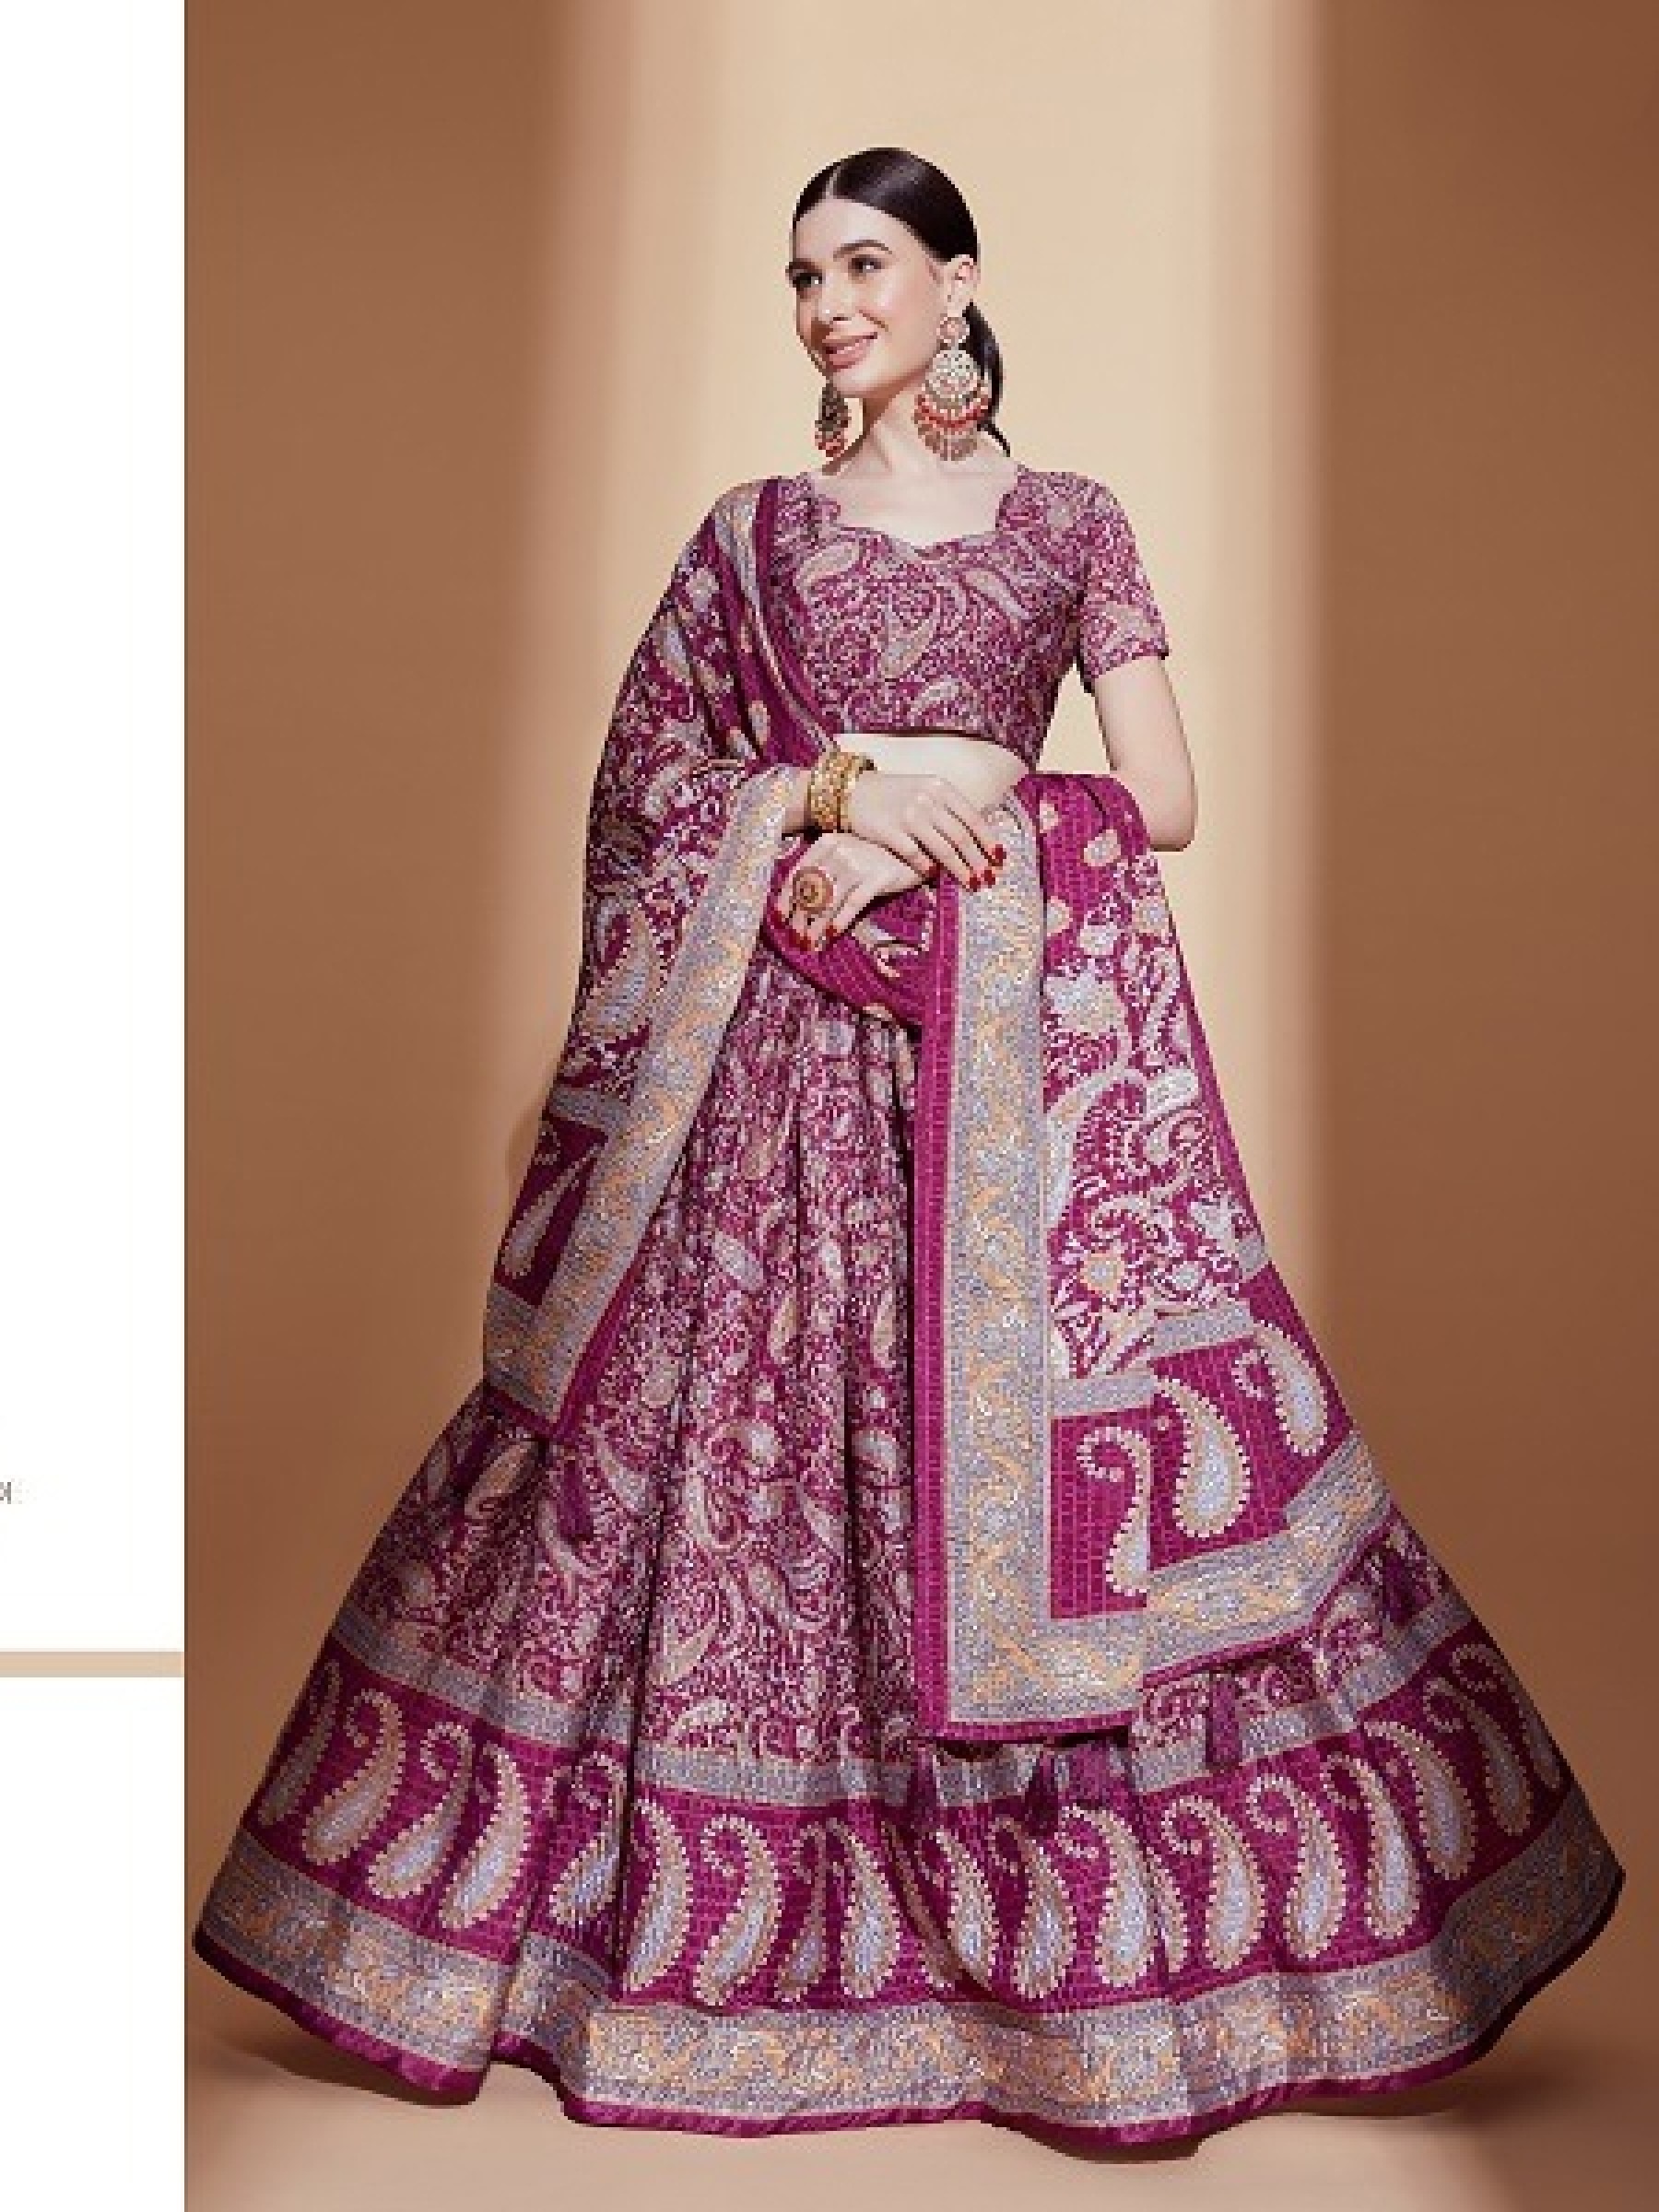 Chinon Silk Party Wear Lehenga in Purple Color With Digital Print work